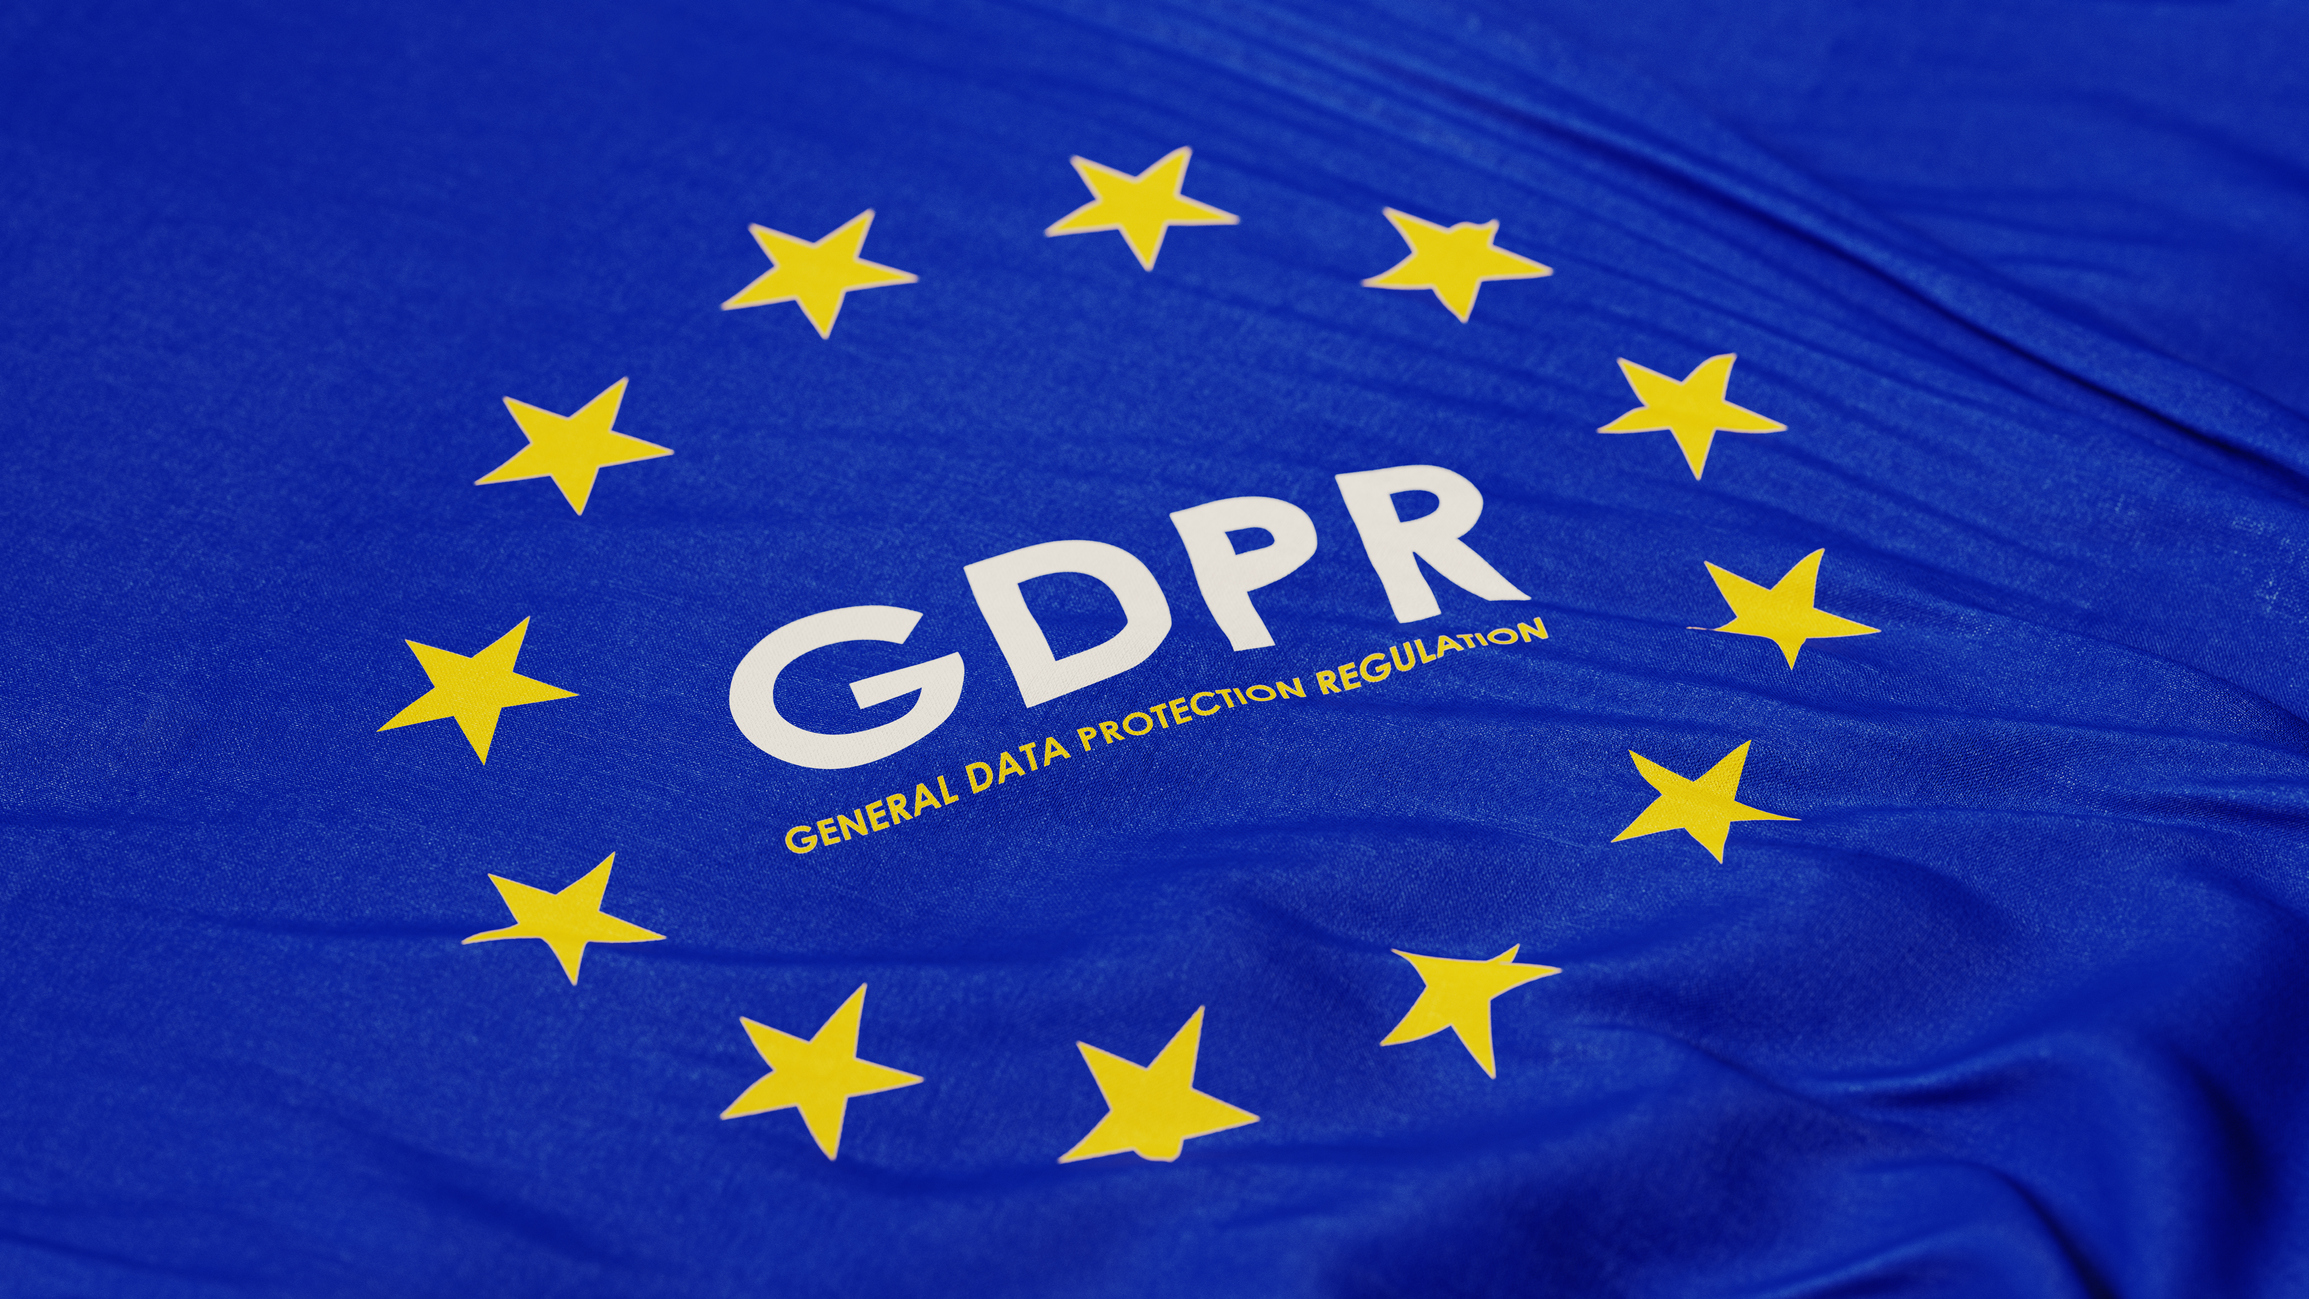 European Union Flag With GDPR Text In The Middle